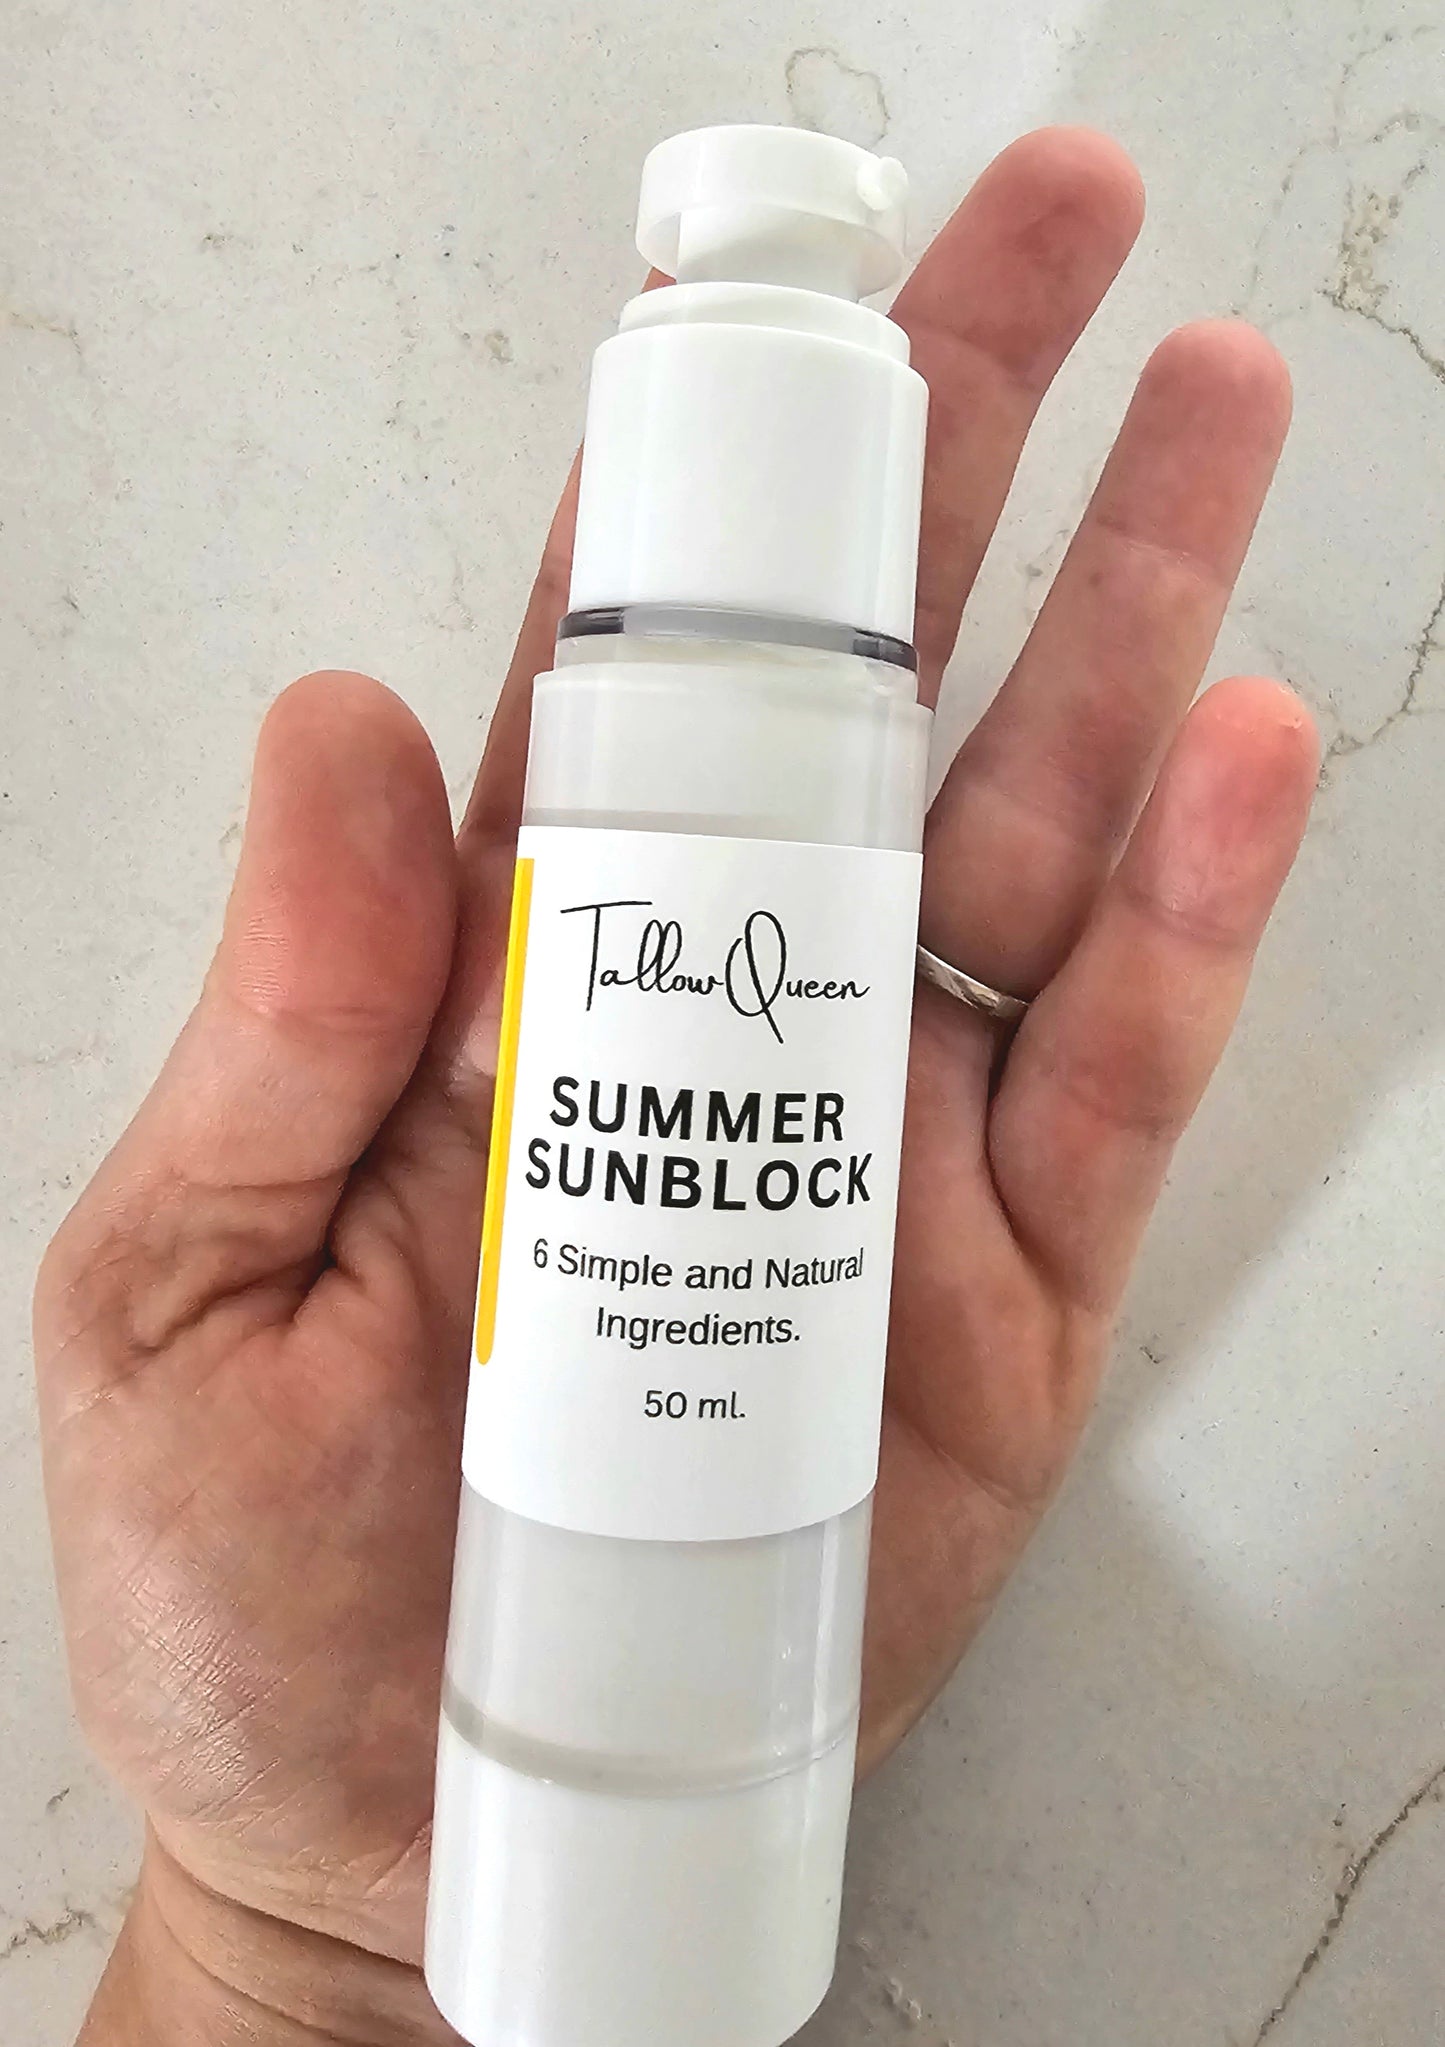 SUNSCREEN Clean, Natural and Effective.